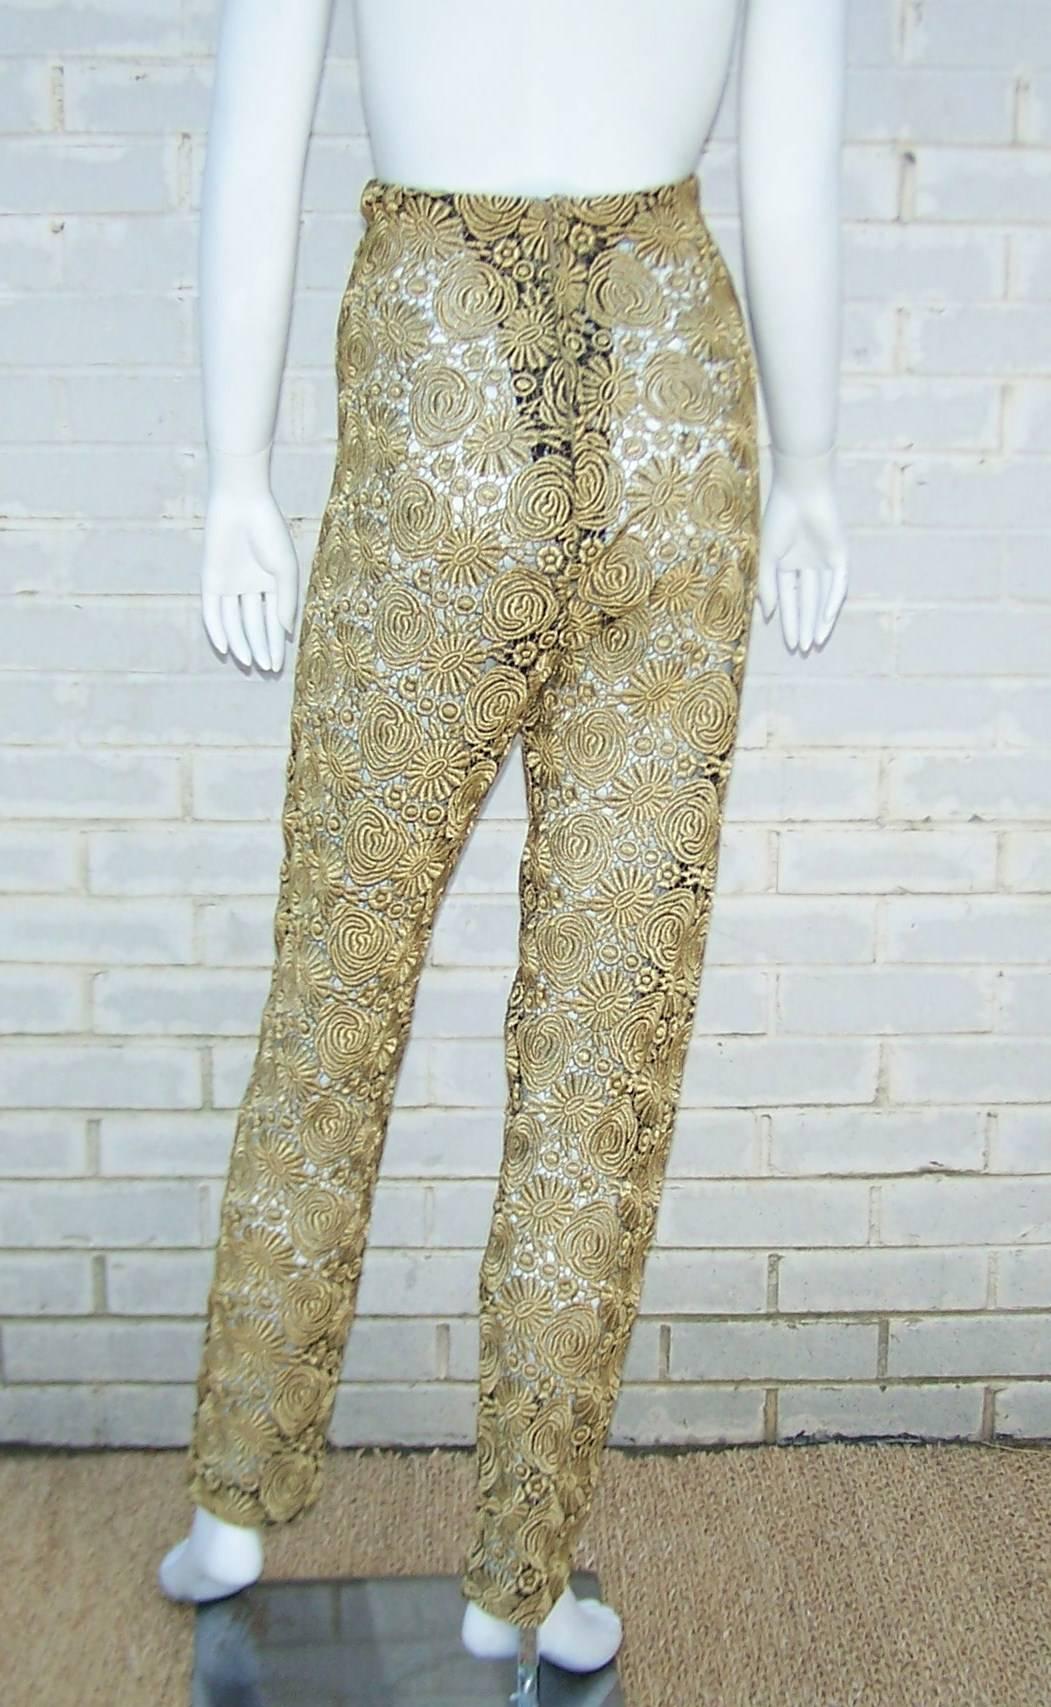 Women's 1980's Victorio & Lucchino High Waist Gold Lace Cigarette Pants